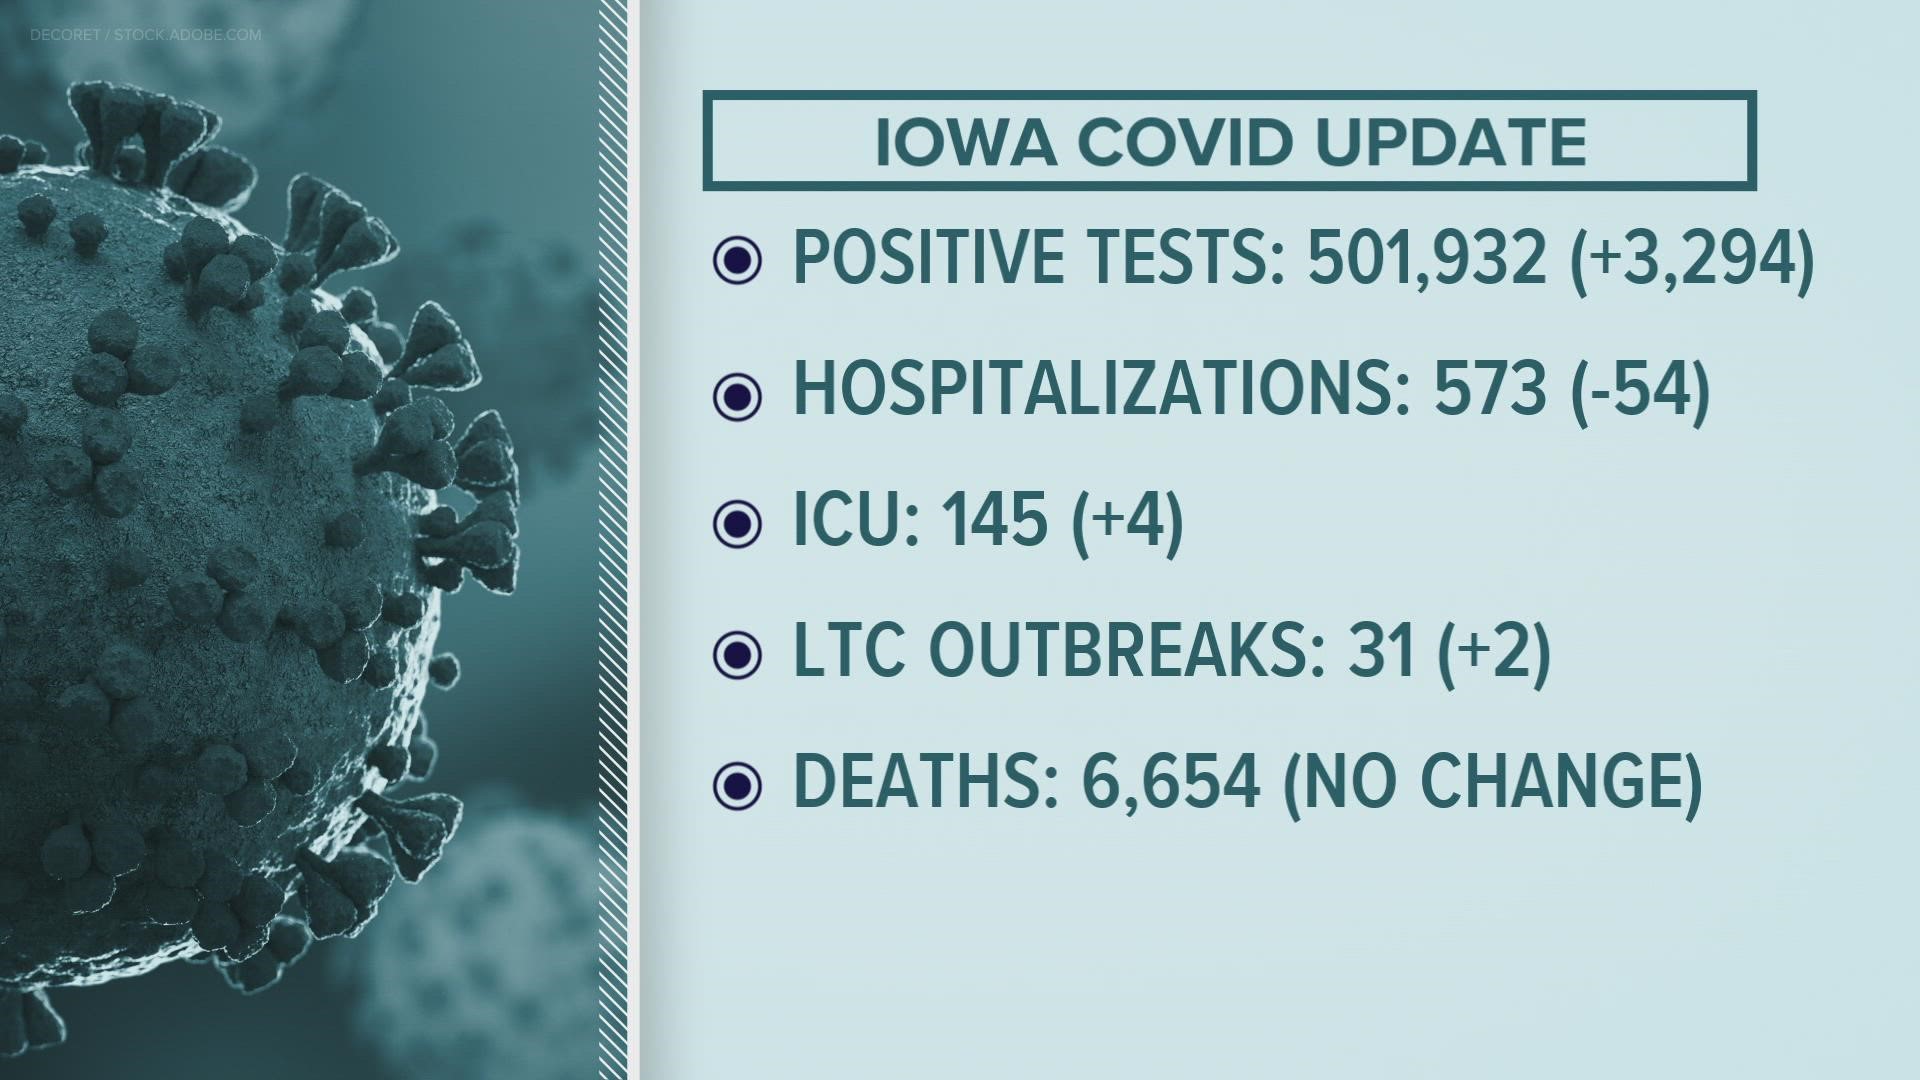 3,294 more positive tests were reported from Oct. 6.